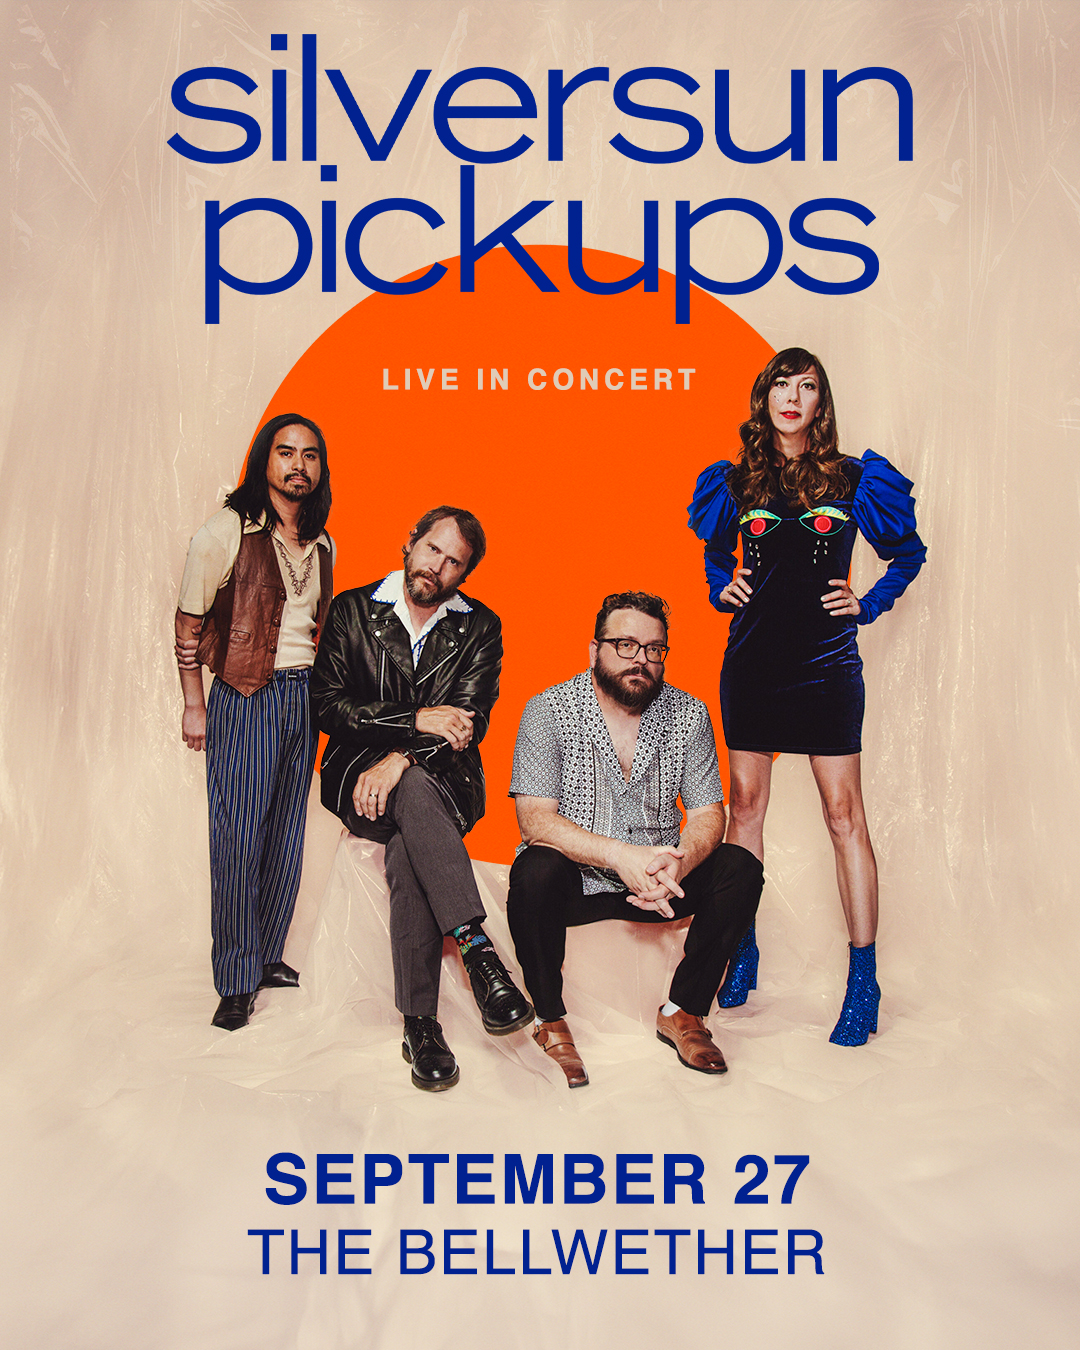 NEW SHOW: Los Angeles, CA  Sep 27 – Silversun Pickups